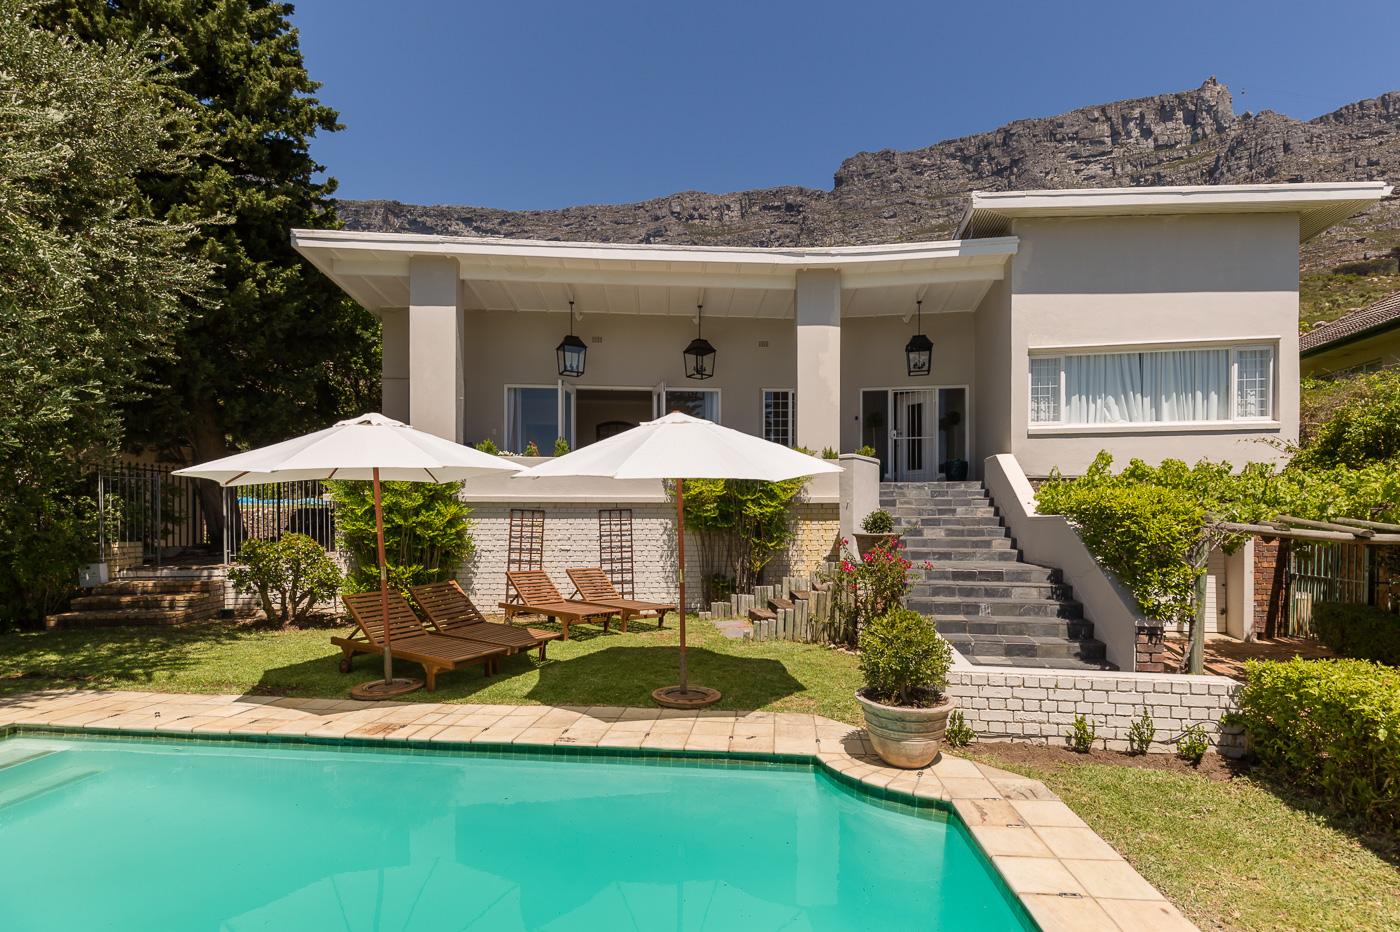 Photo 19 of Bella Montagna accommodation in Oranjezicht, Cape Town with 4 bedrooms and 2 bathrooms